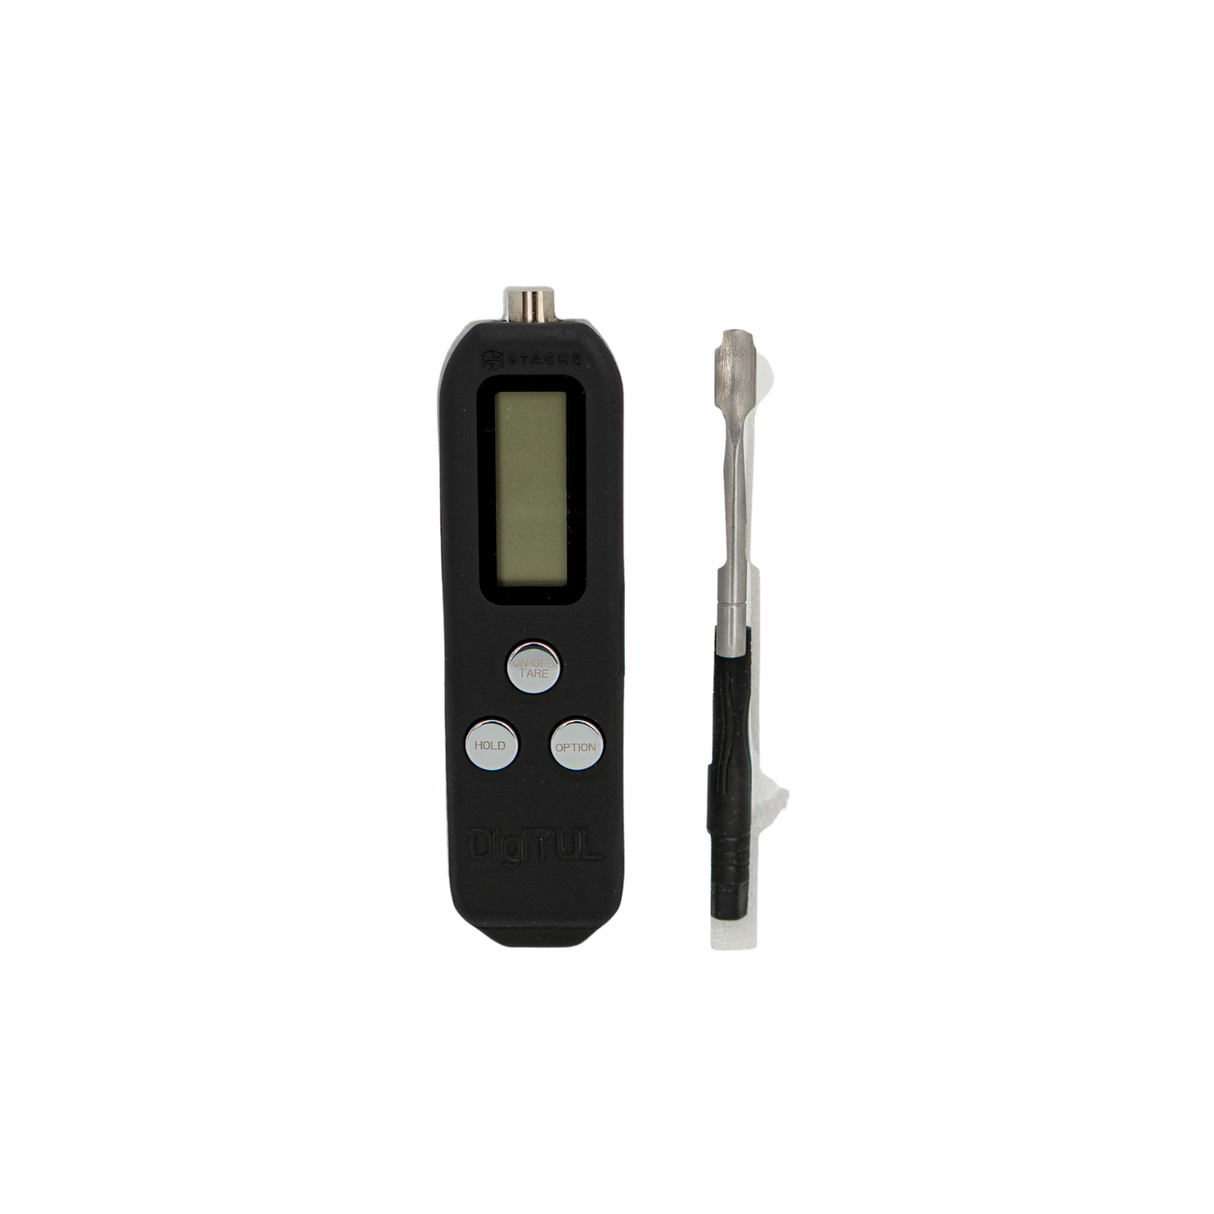 Stacheproducts DigiTül - Digital Tool with LCD Screen and Attachments - Front View